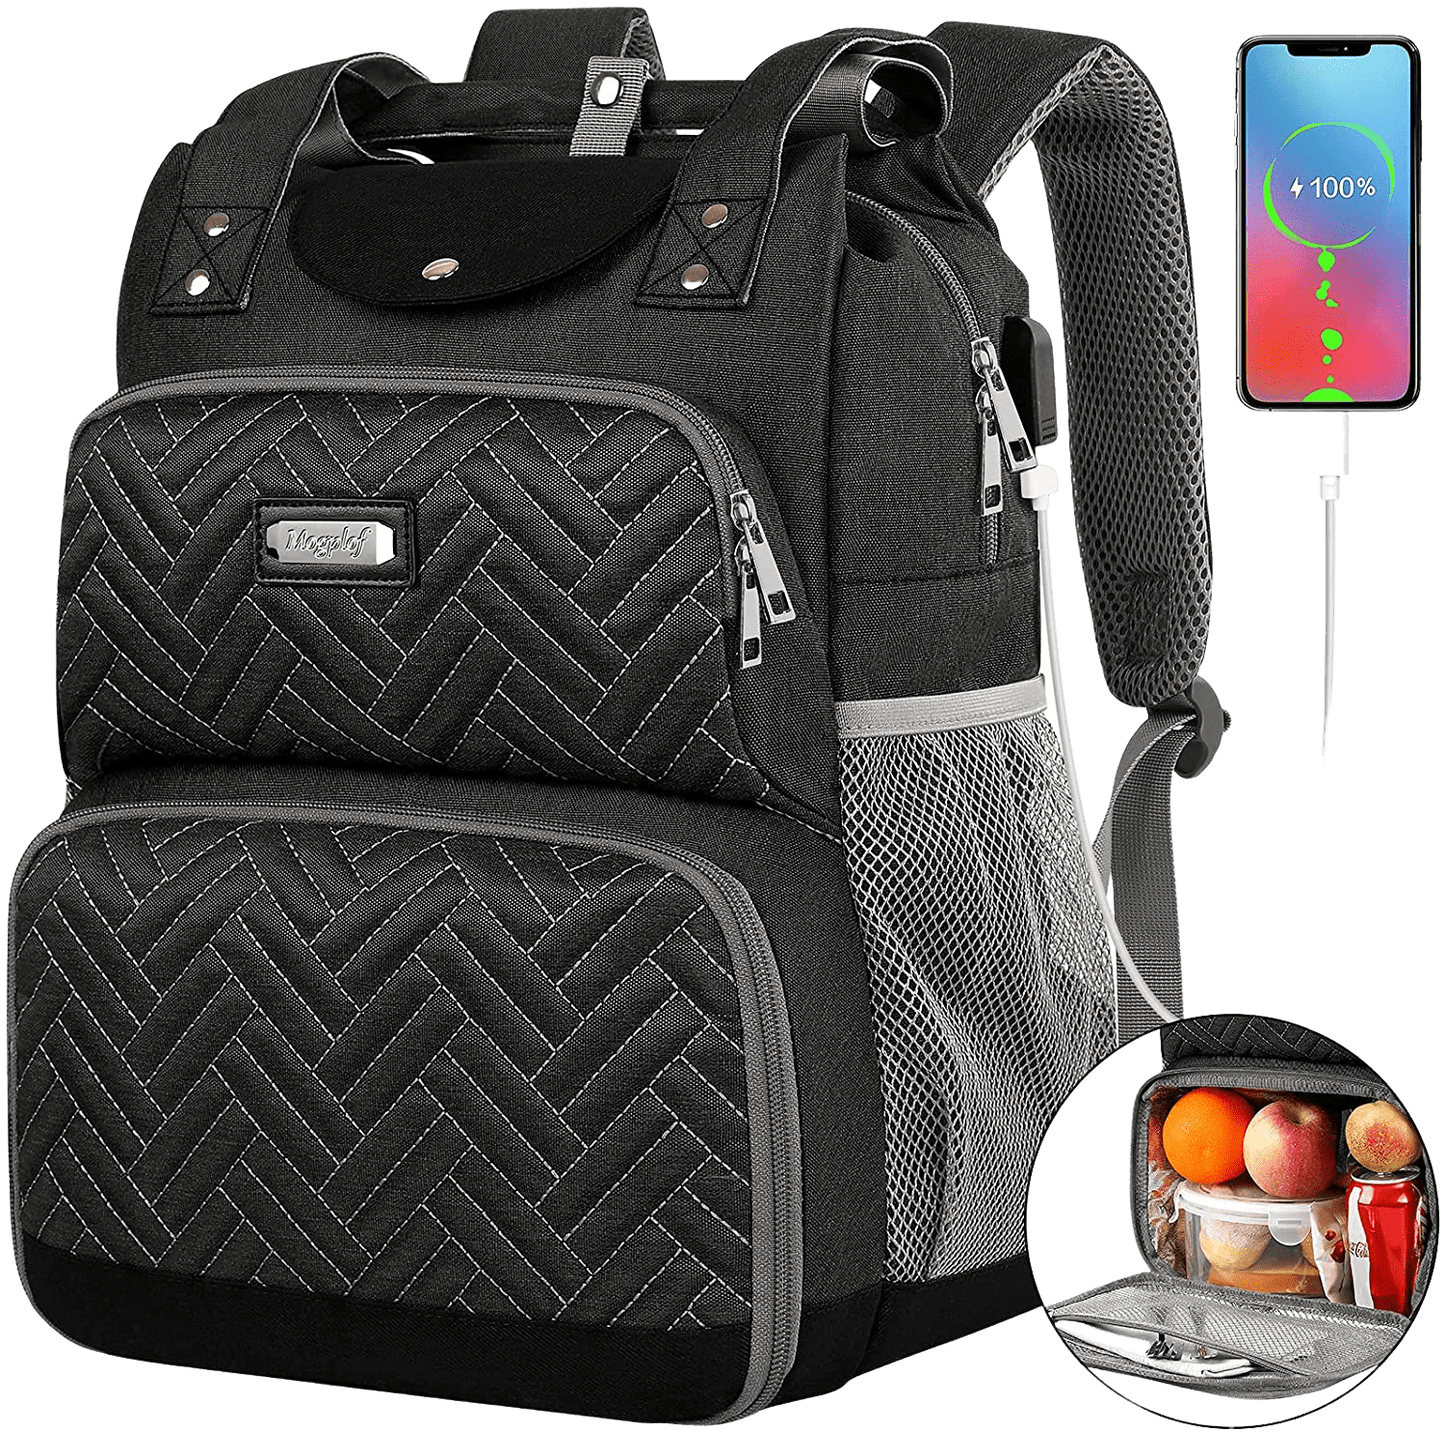 Lunch Backpack, Lunch Box Laptop Backpacks with USB Port RFID Pockets Insulated Cooler Backpack for Women Men, Water Resistant Lunch Food Bag Tote for School Work Beach Picnic Trip Fits 15.6  - Home Decor Gifts and More